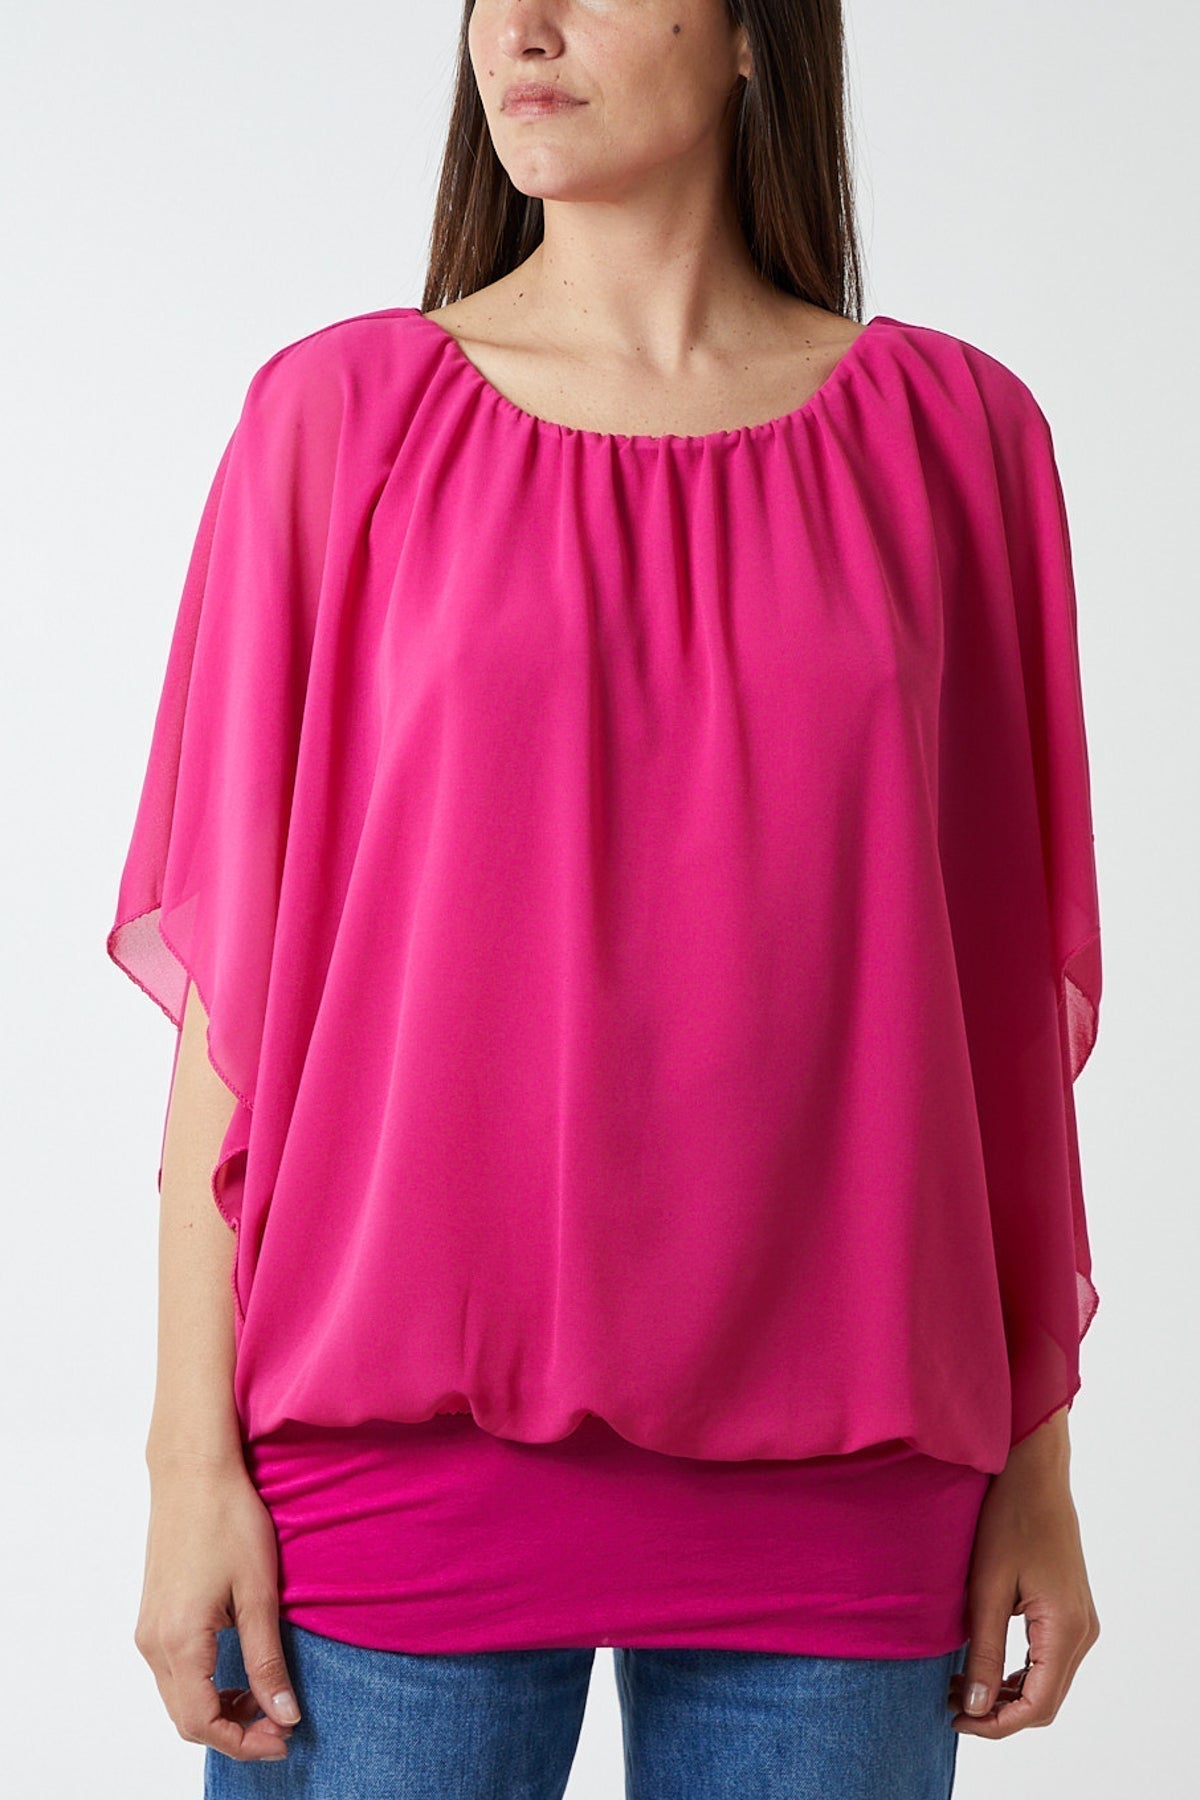 Theresa Italian Double Layer Necklace Top